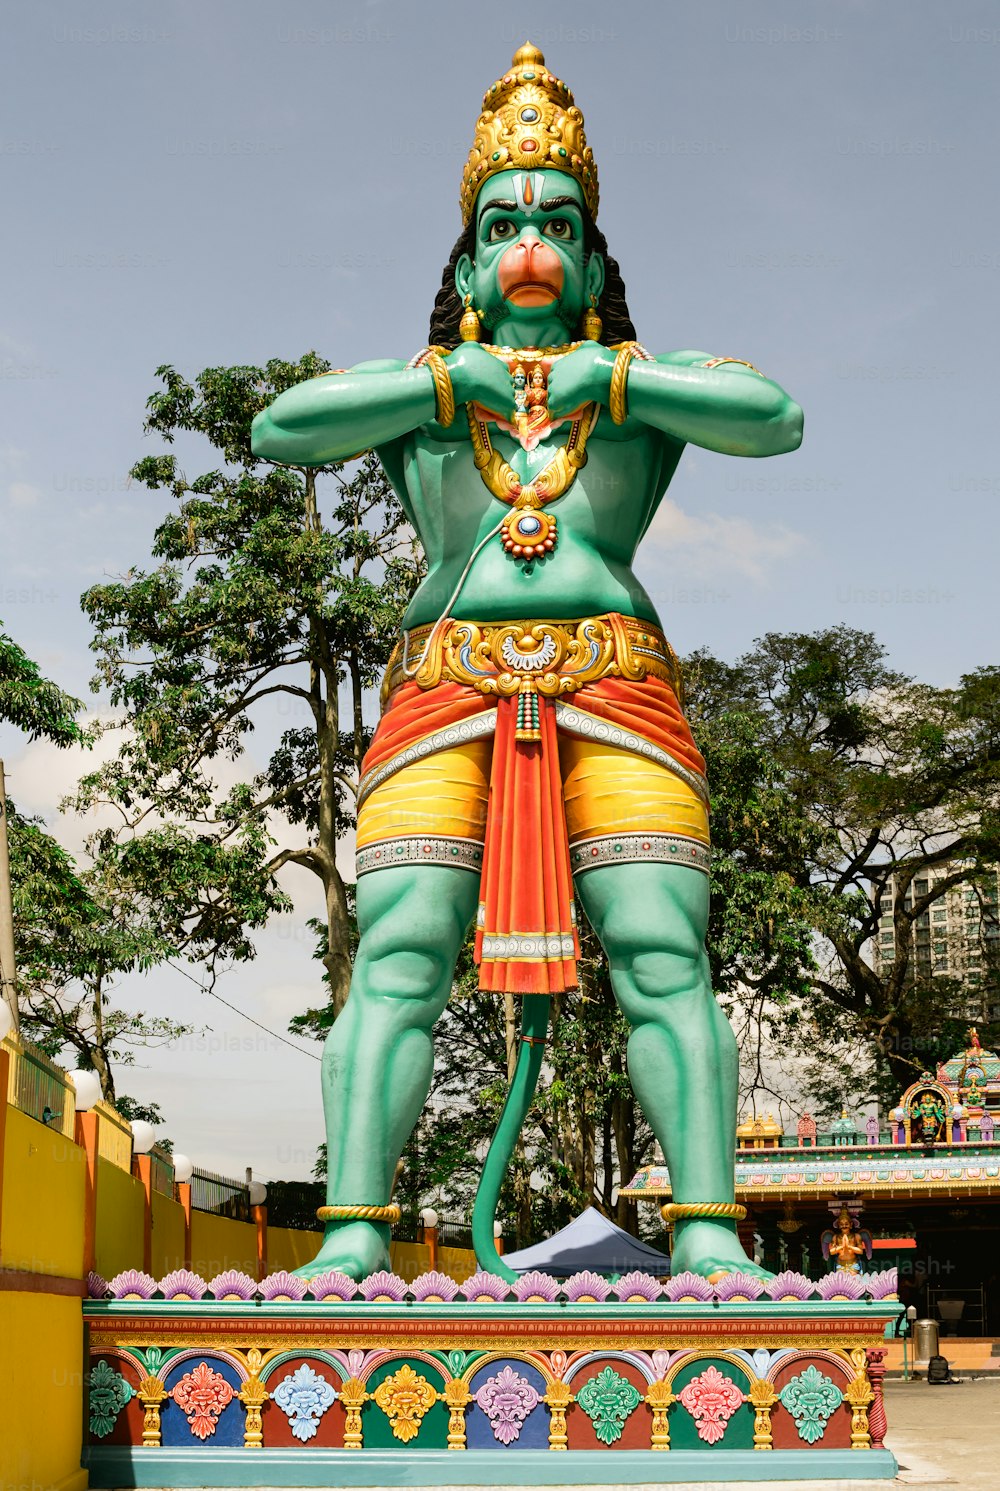 a large statue of a man in a green outfit